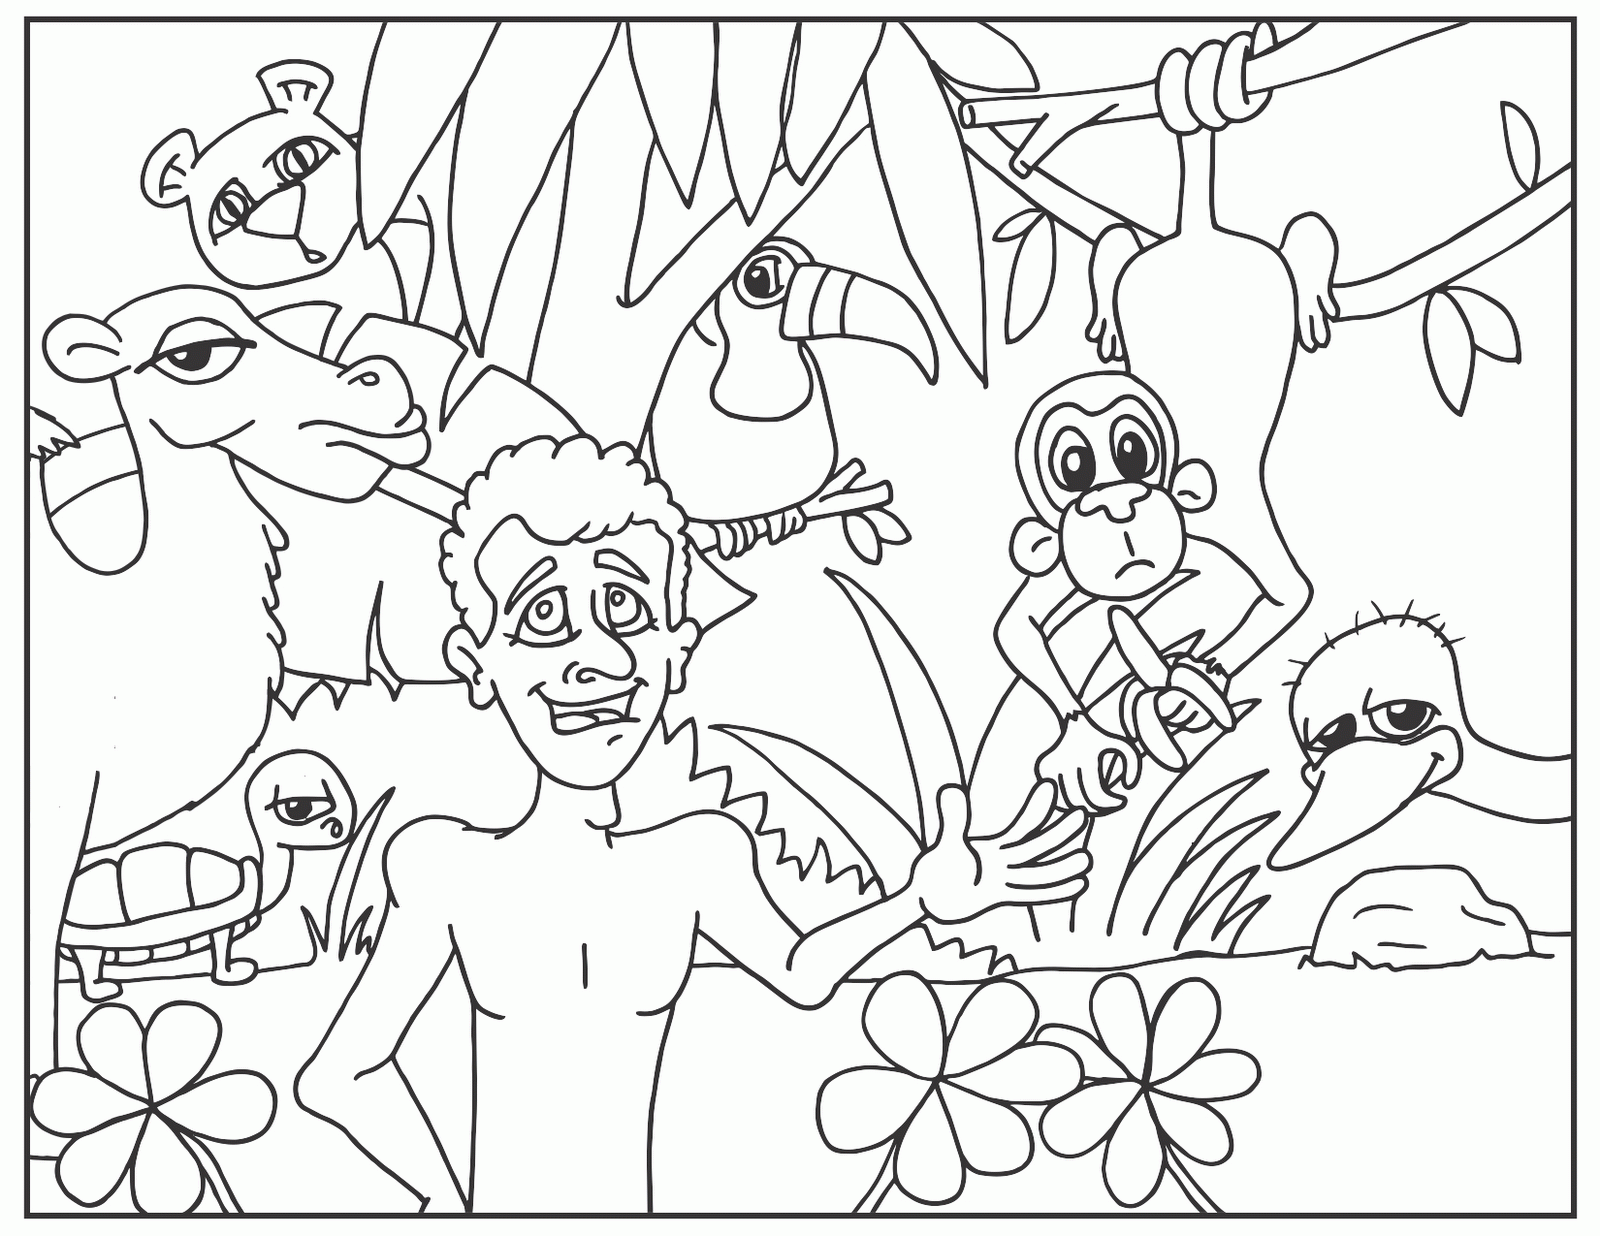 Practice Free The Month June Coloring Pages - Widetheme